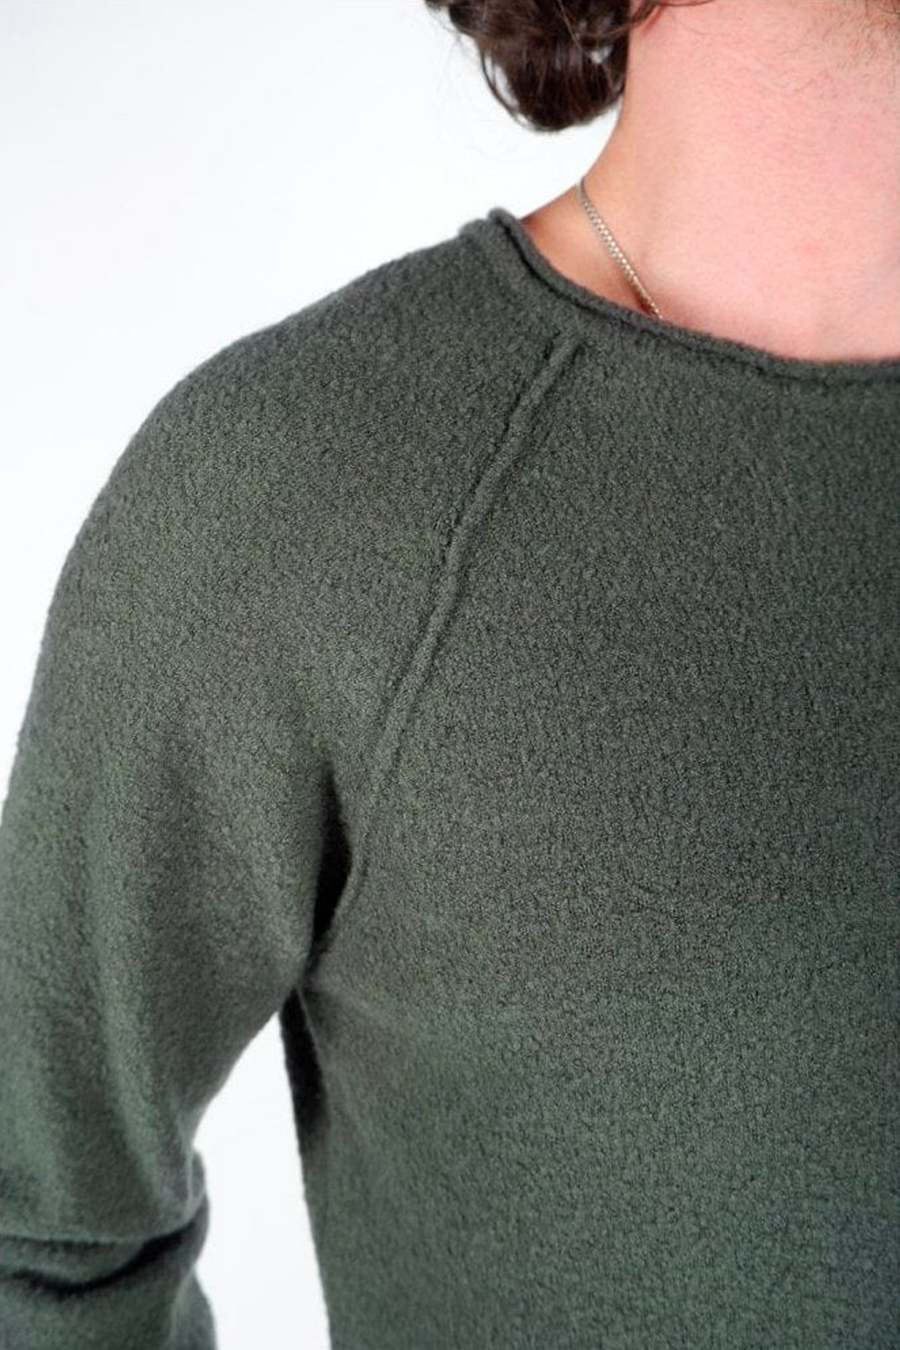 Buy the Daniele Fiesoli Boiled Wool Round Neck in Olive Green at Intro. Spend £50 for free UK delivery. Official stockists. We ship worldwide.